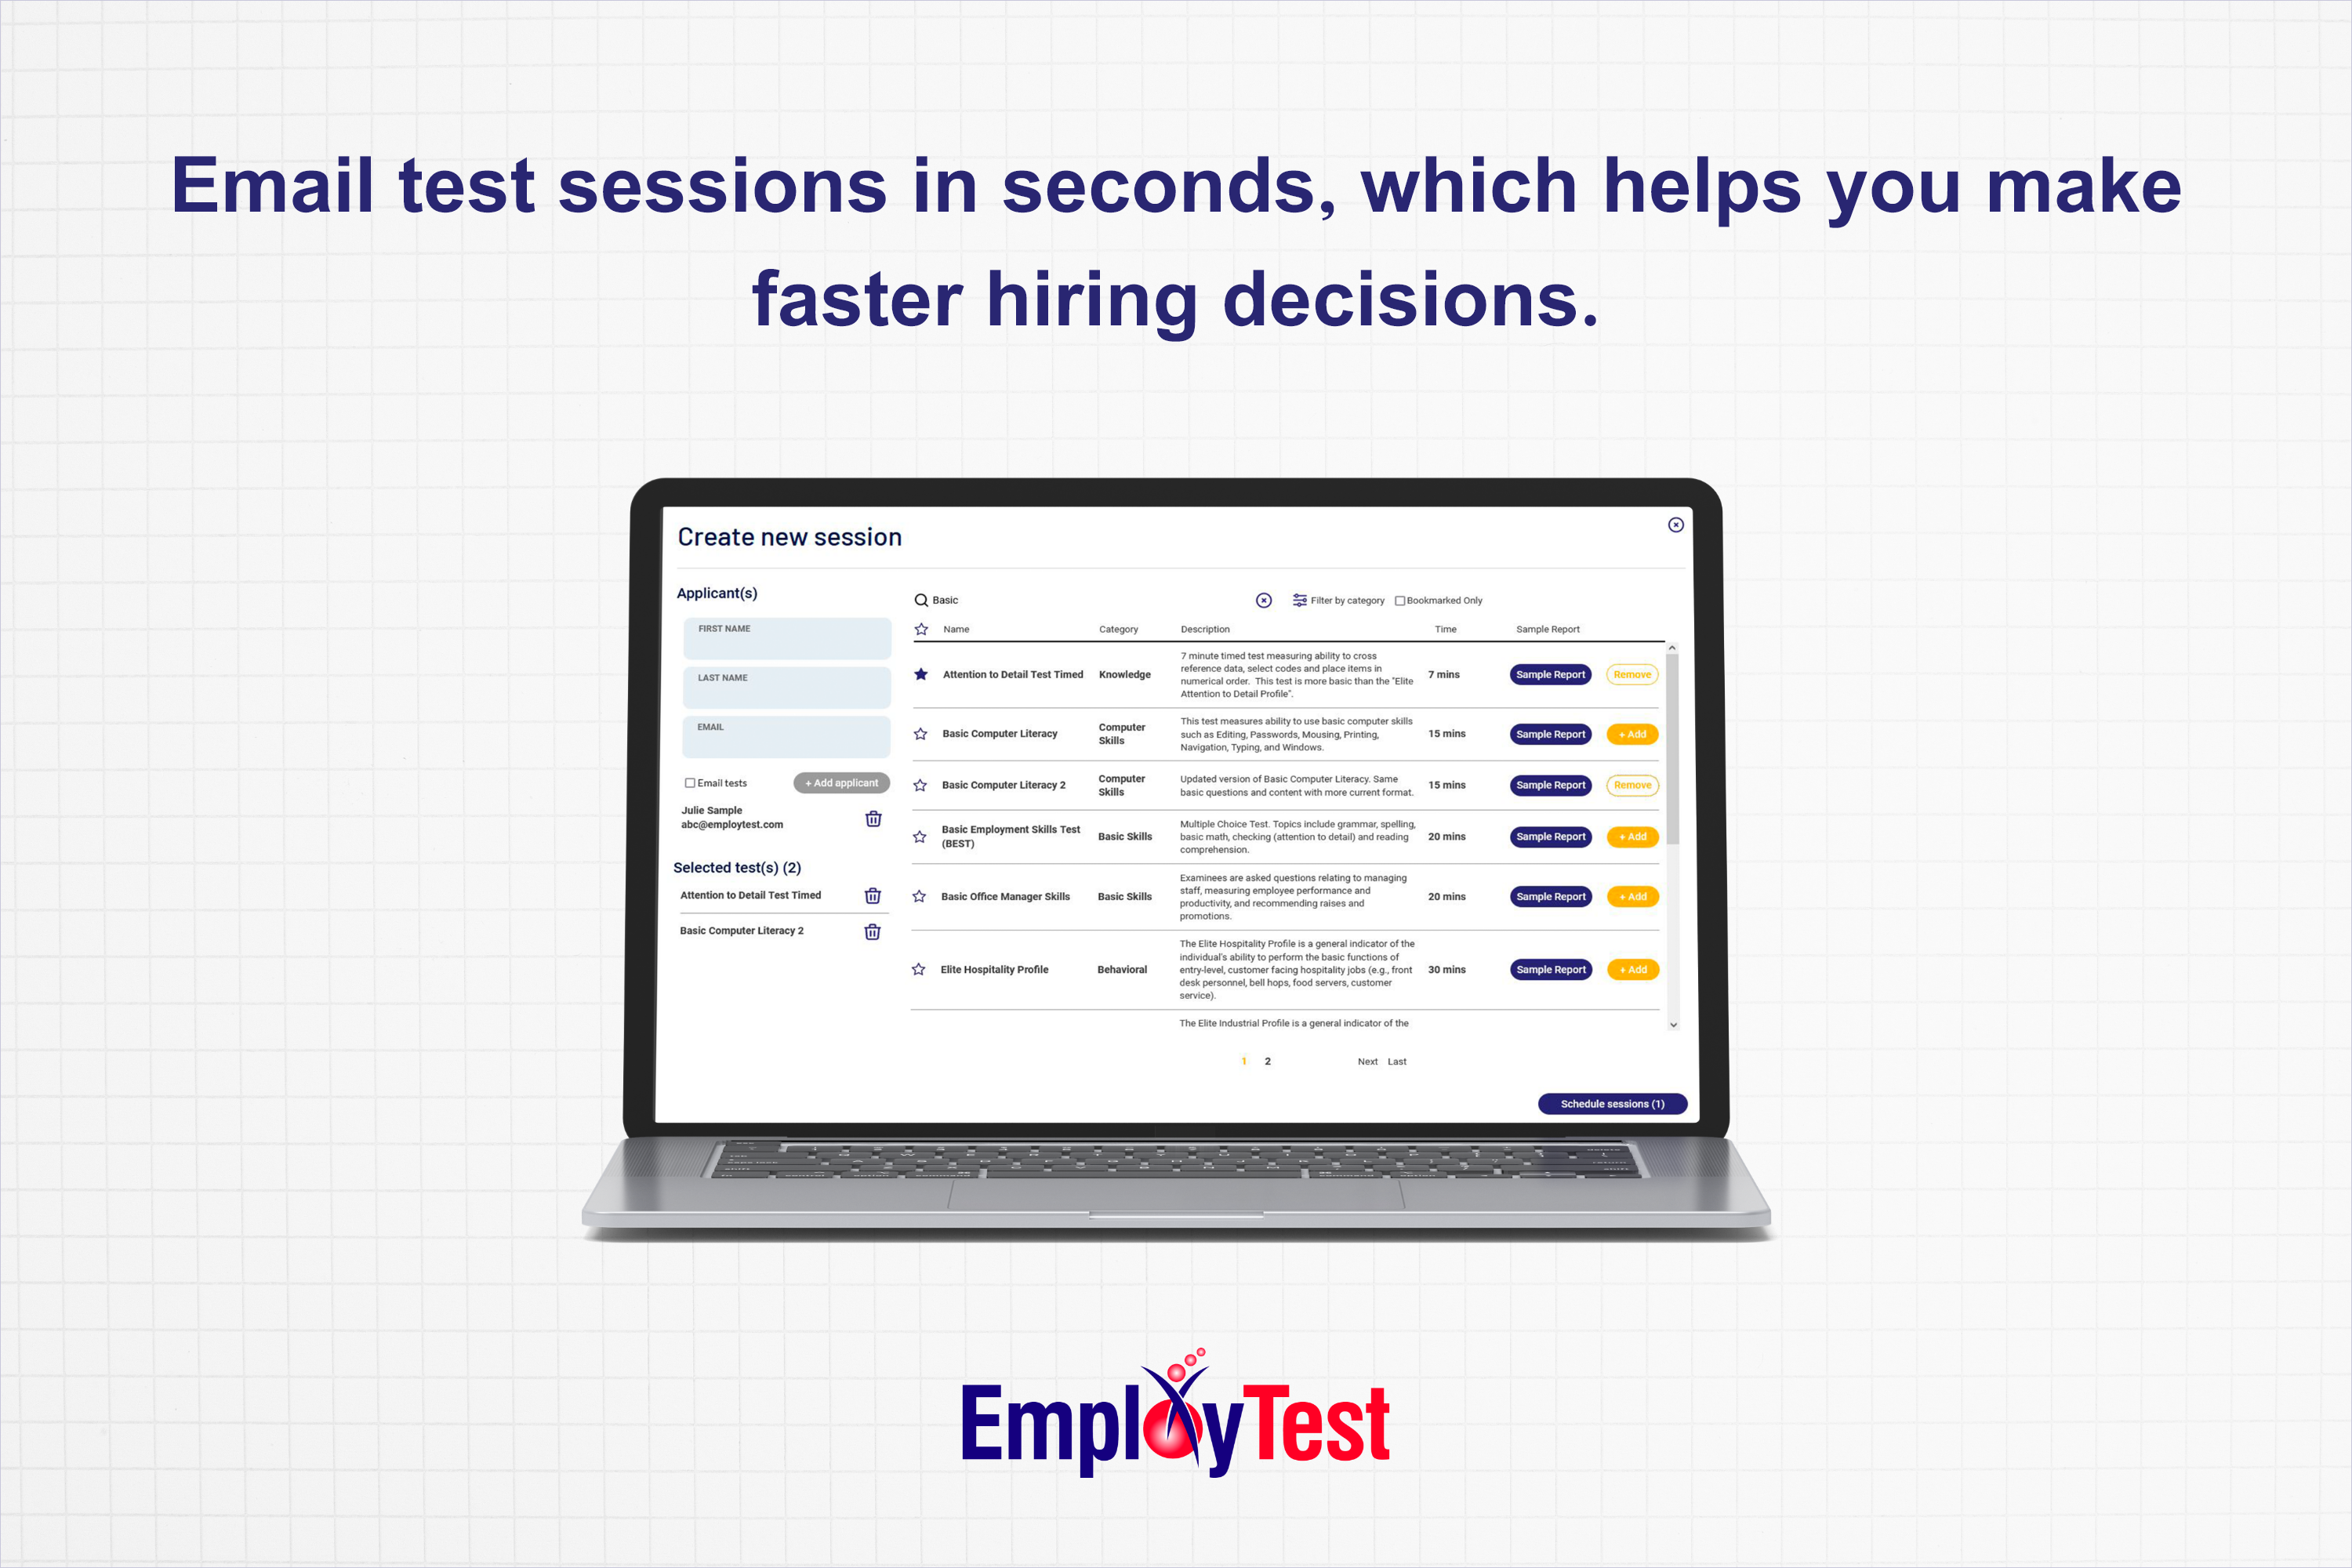 Send a test session straight to your candidate's email